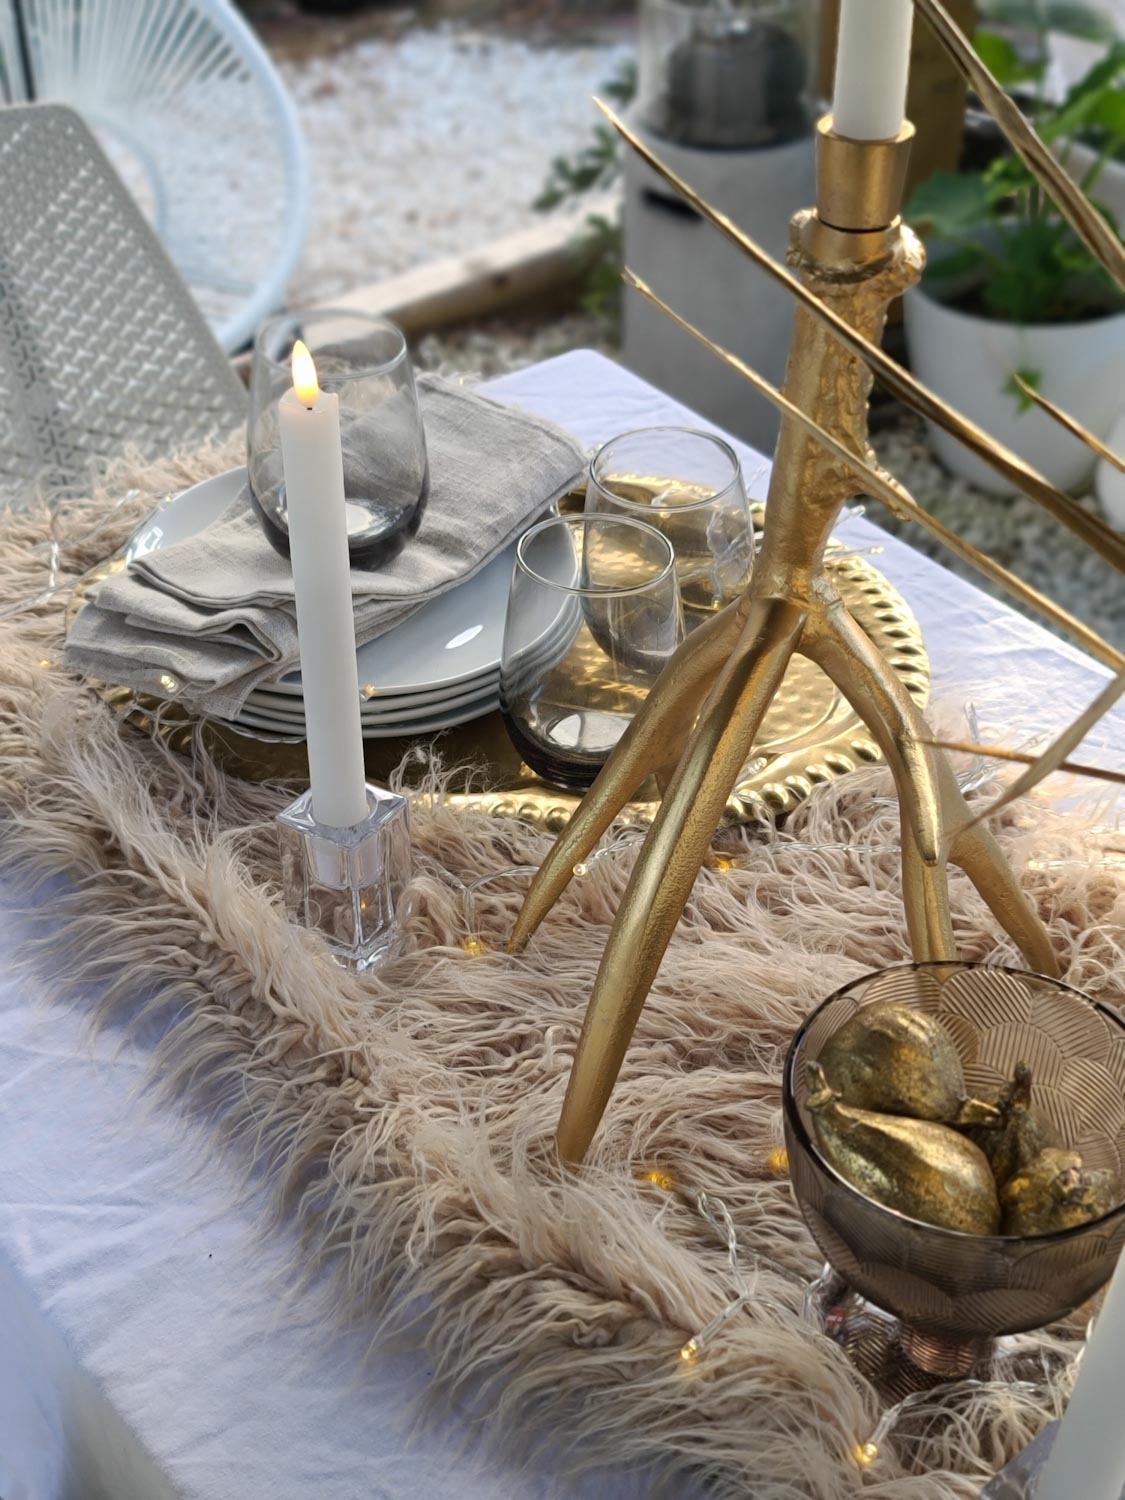 Cozy White Winter Outdoors Bed Bath & Beyond Firepit Dining Candles Tablescape Tablesetting Scandinavian Modern Farmhouse Fur Antlers Gold